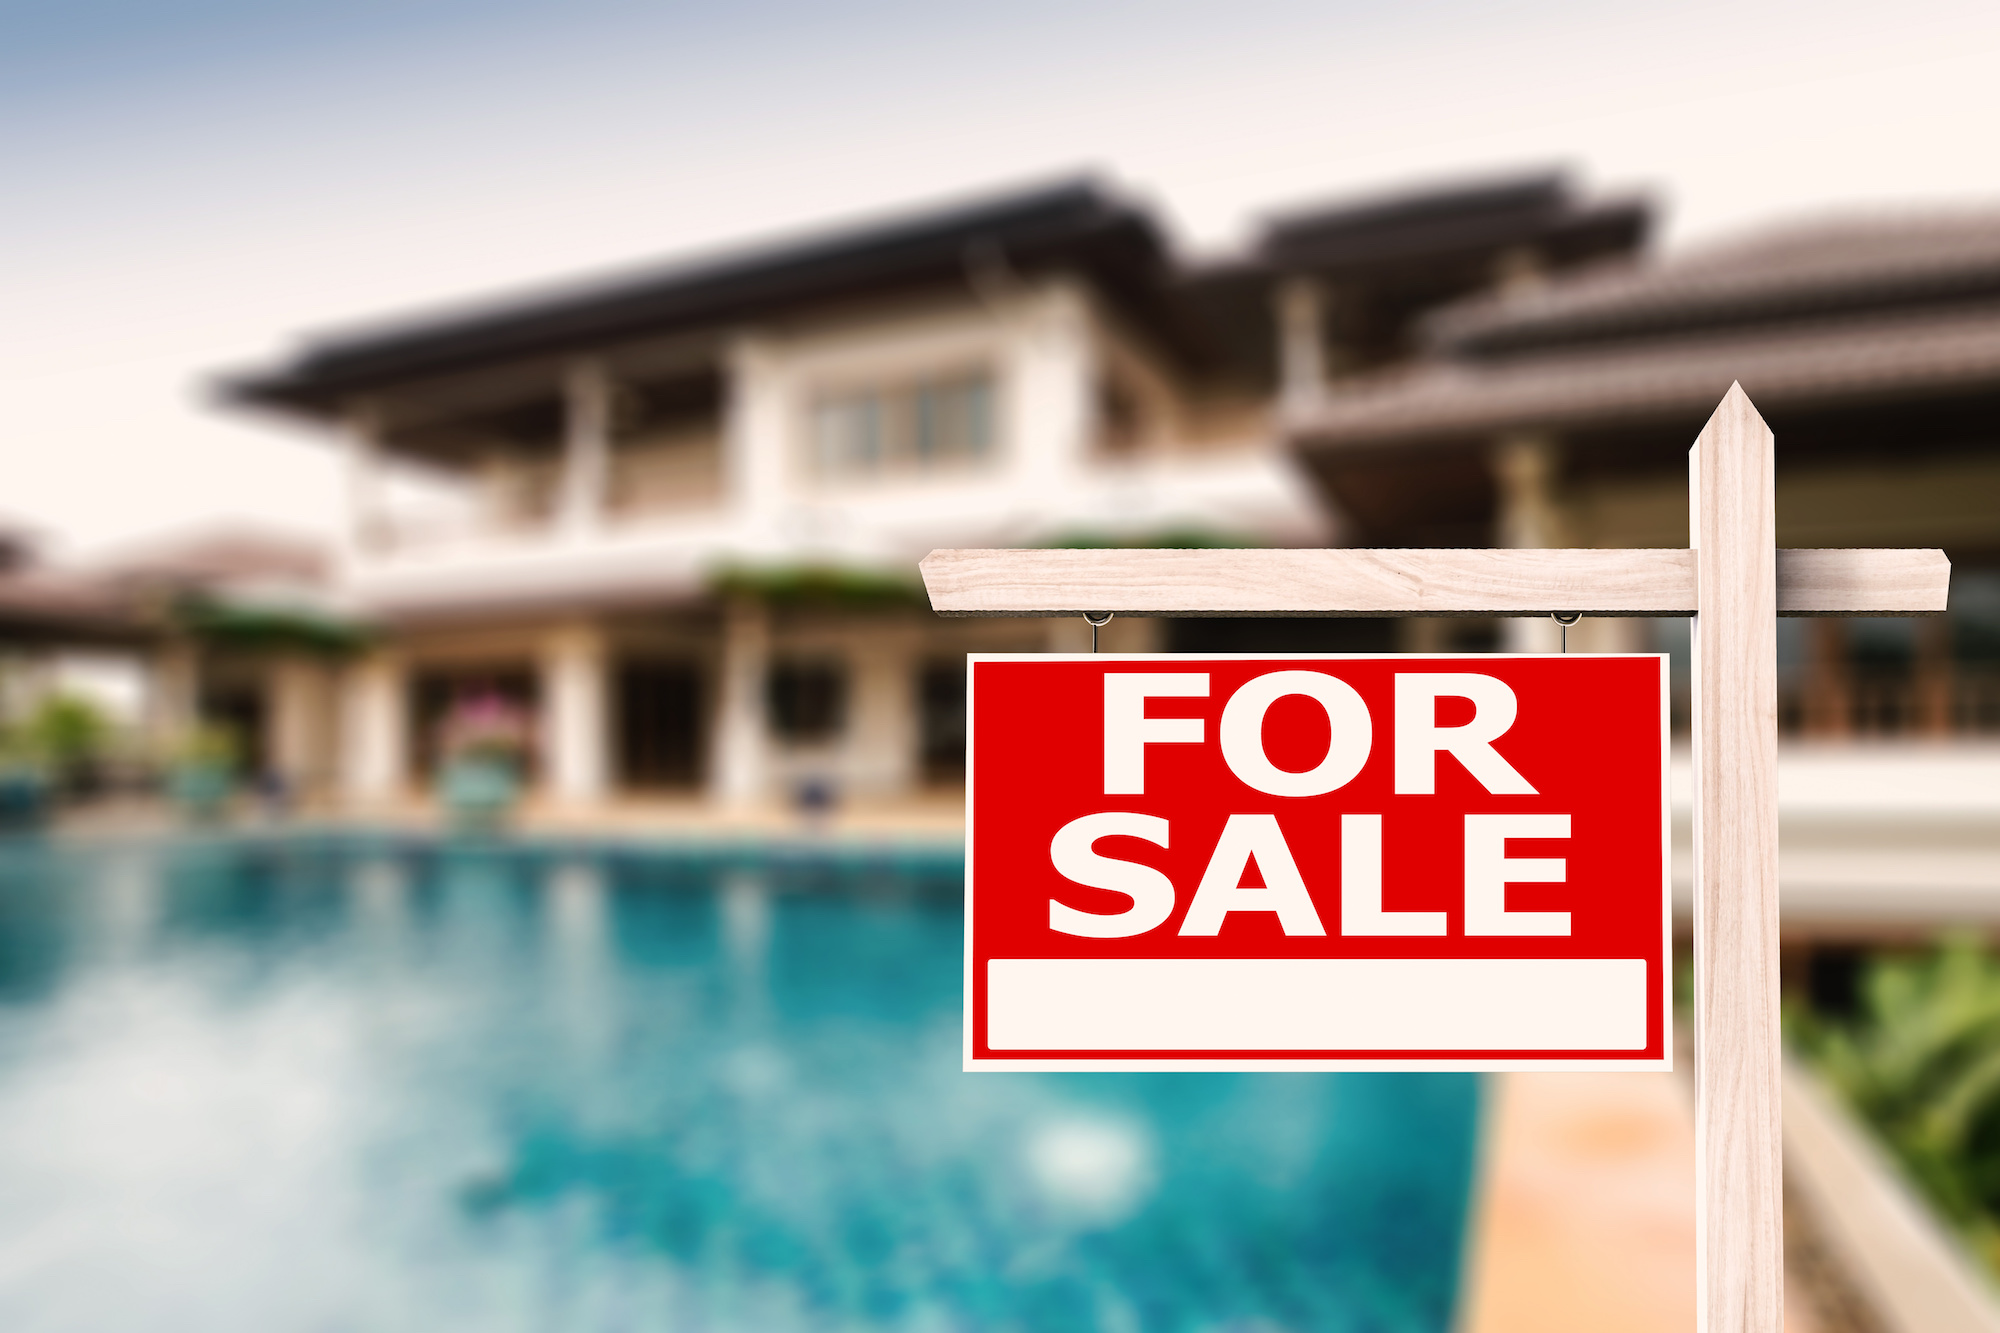 "For sale" sign in front of a house with a pool.